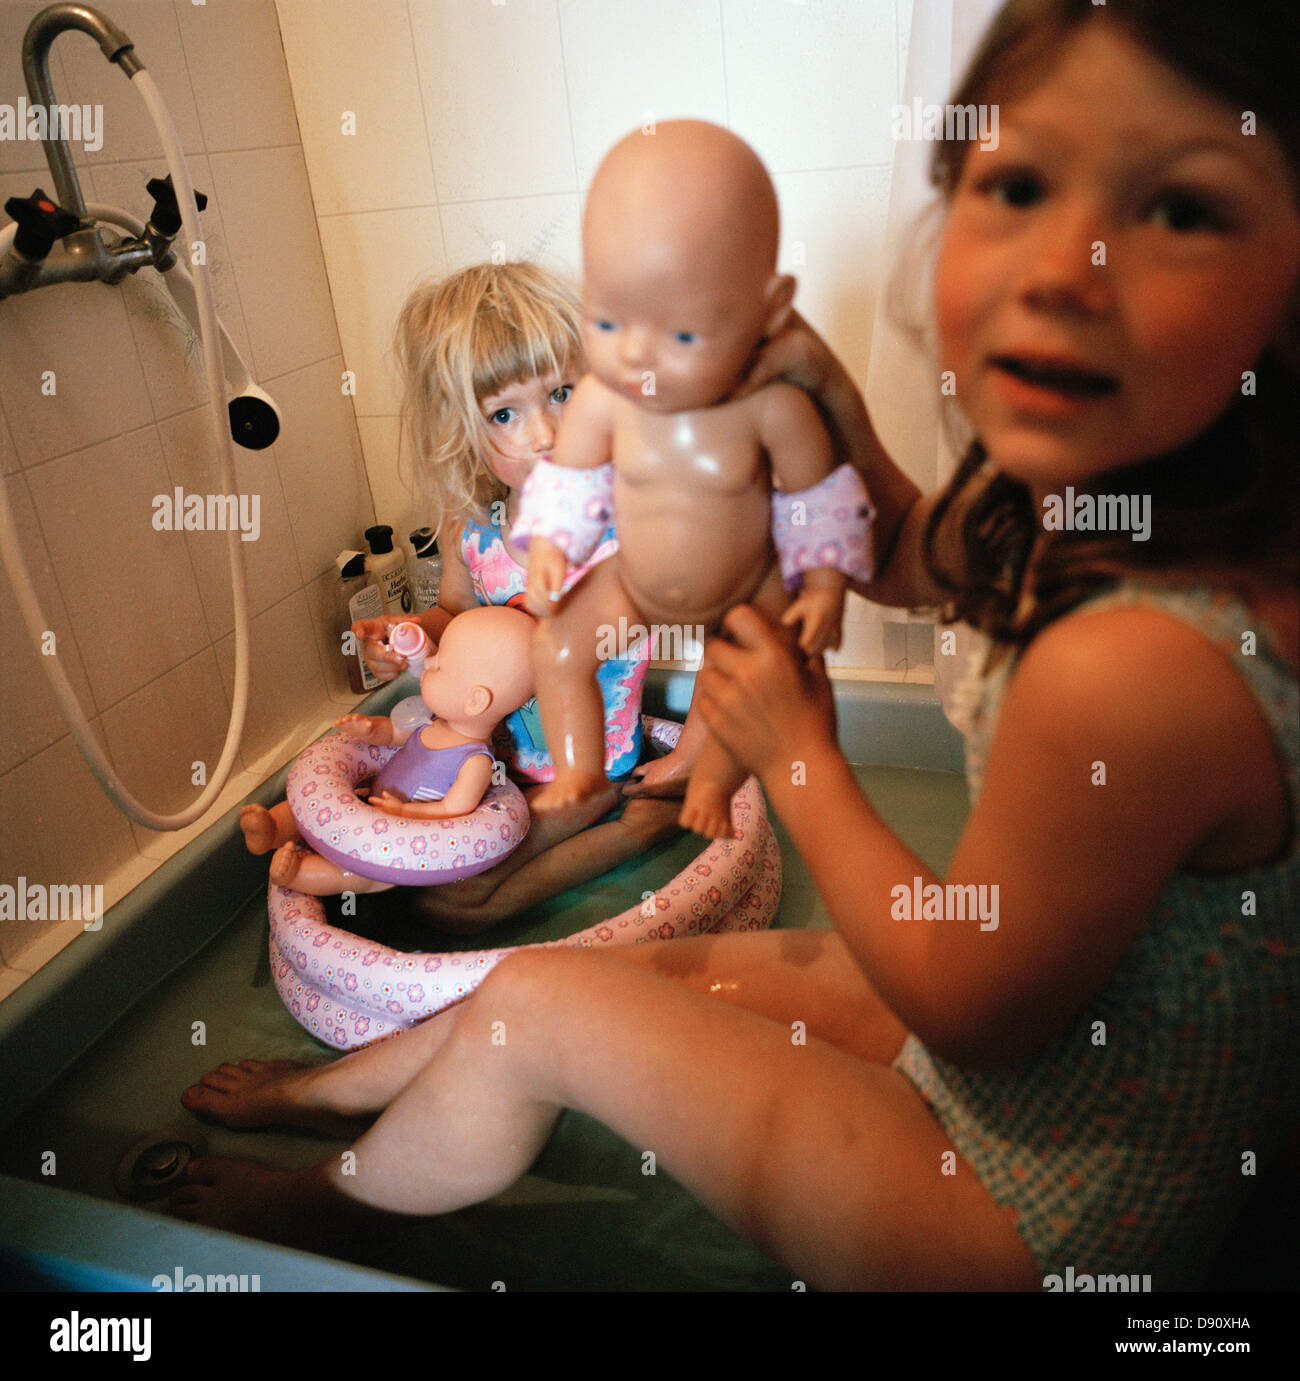 Two girls playing with dolls in a bathroom, Sweden. Stock Photo